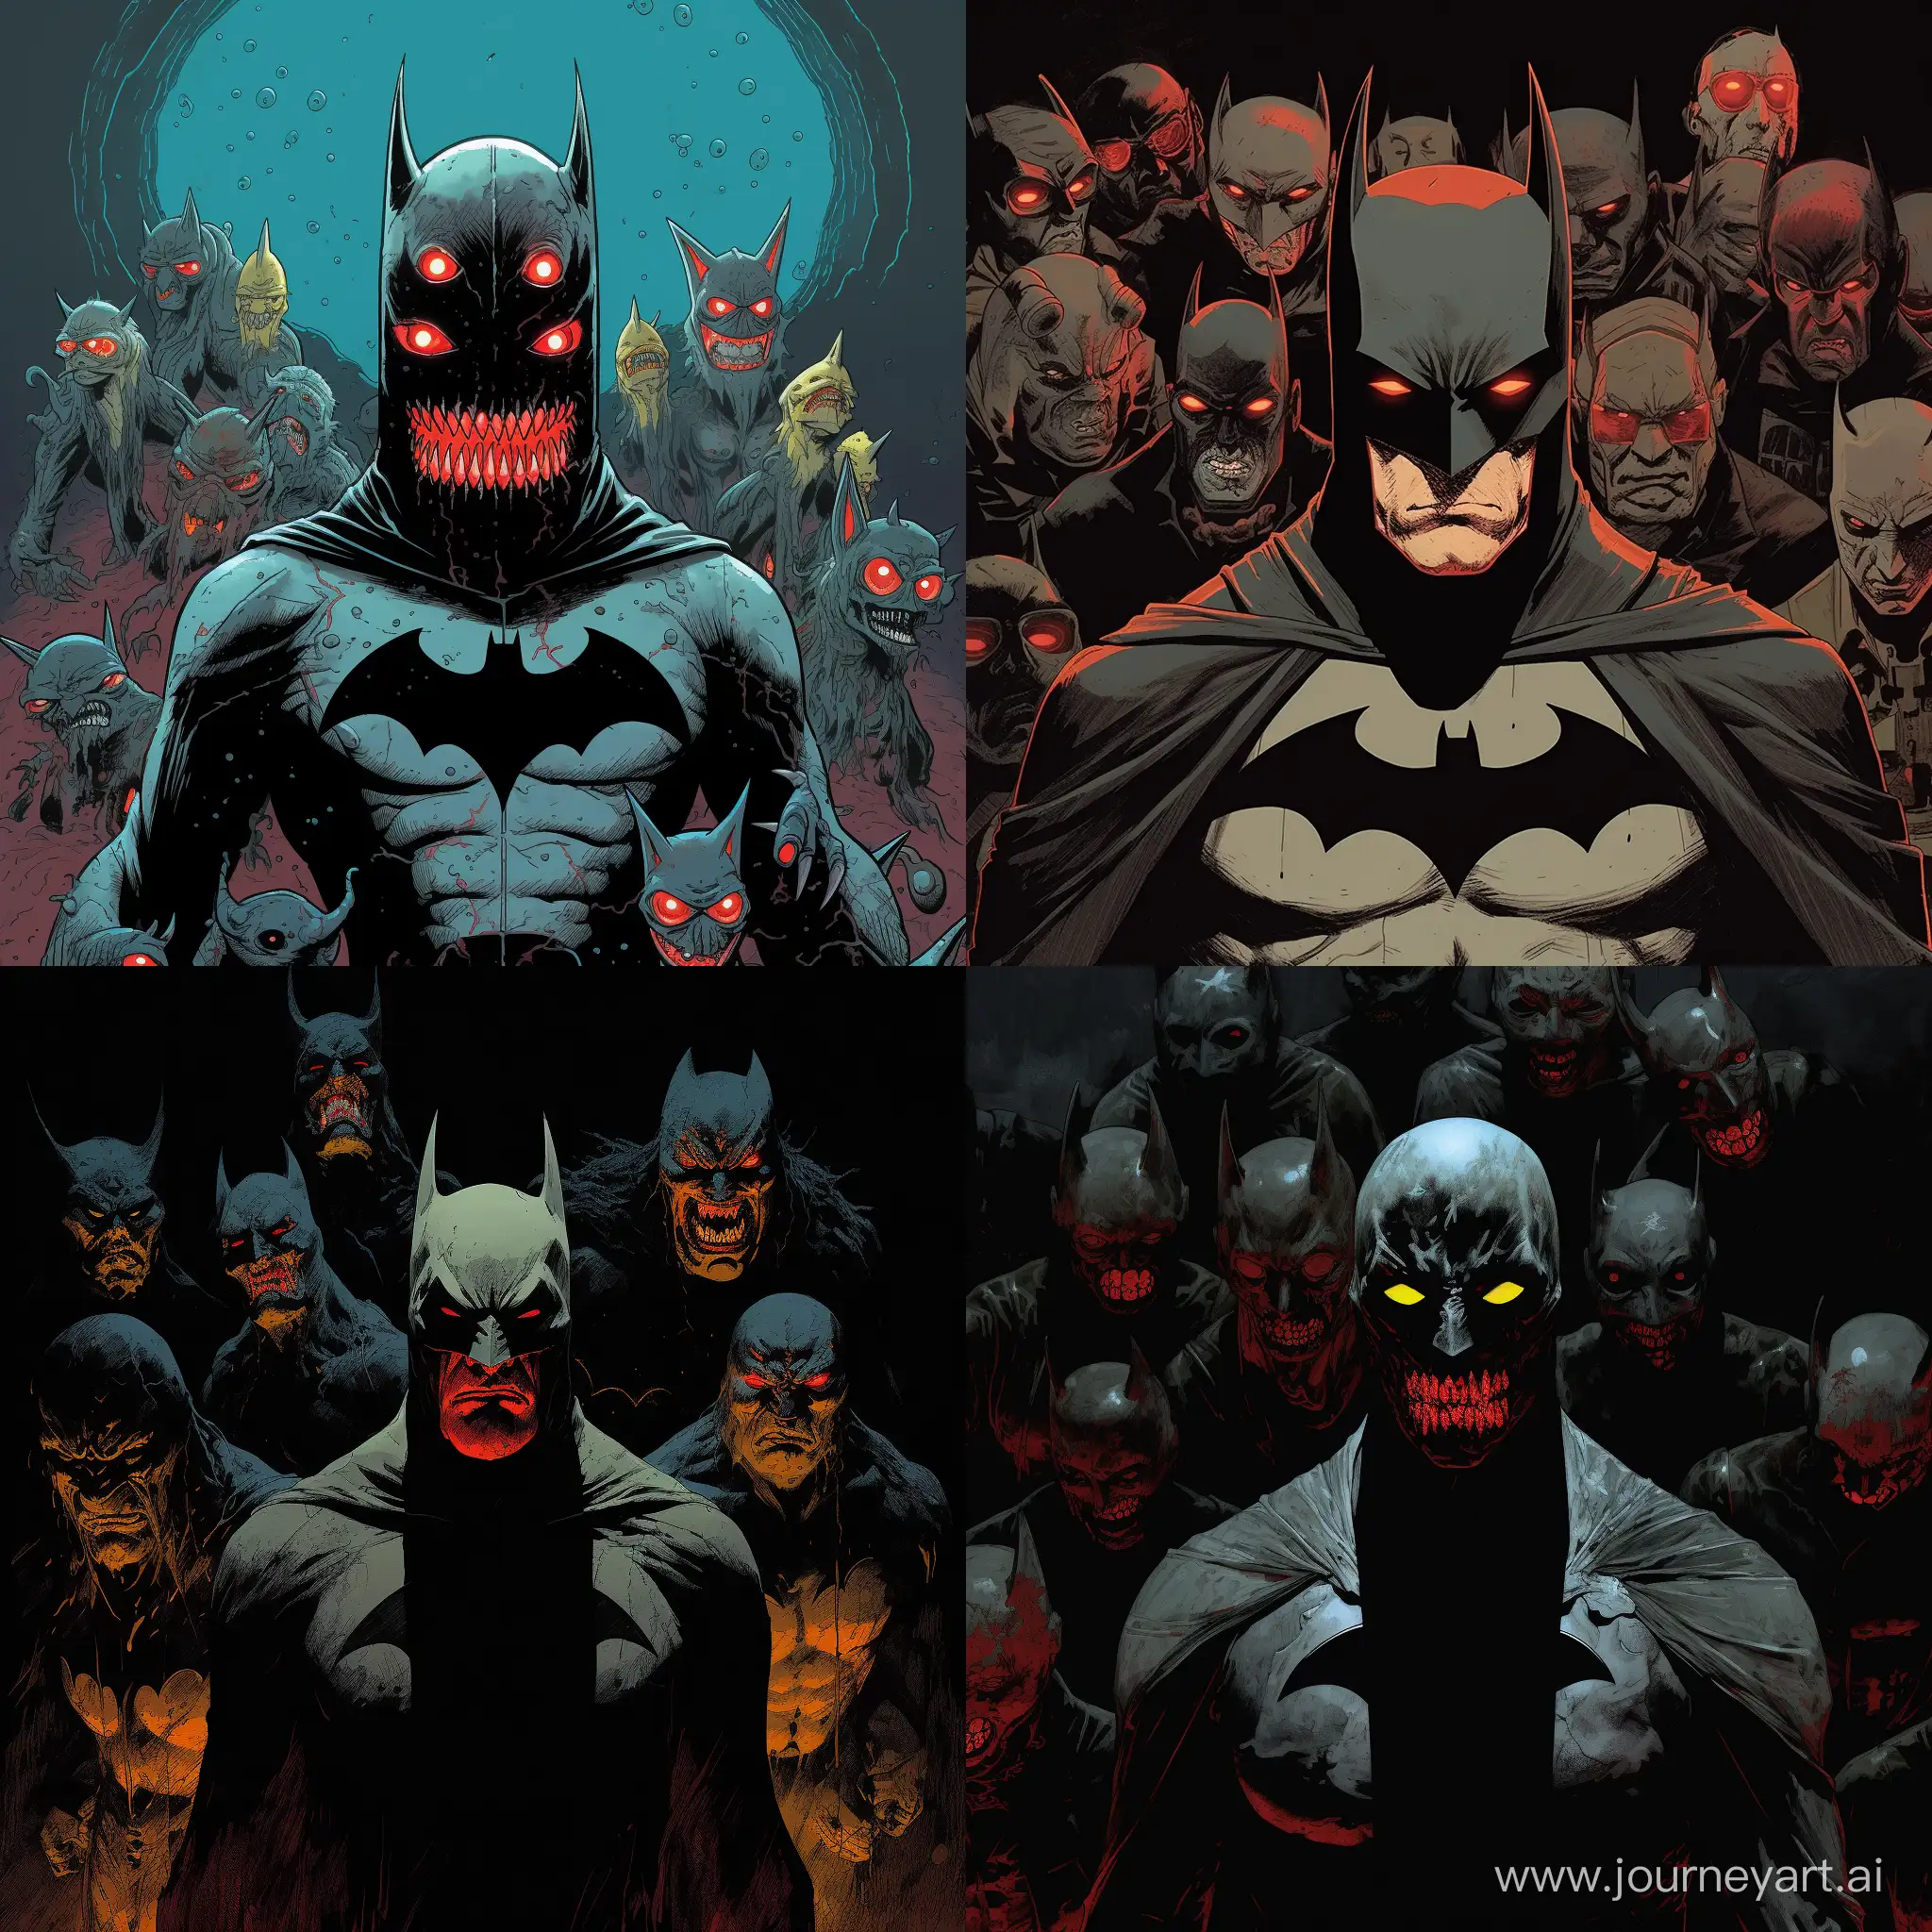 Mike-Mignola-Batman-Comic-Cover-with-FishFace-Expressions